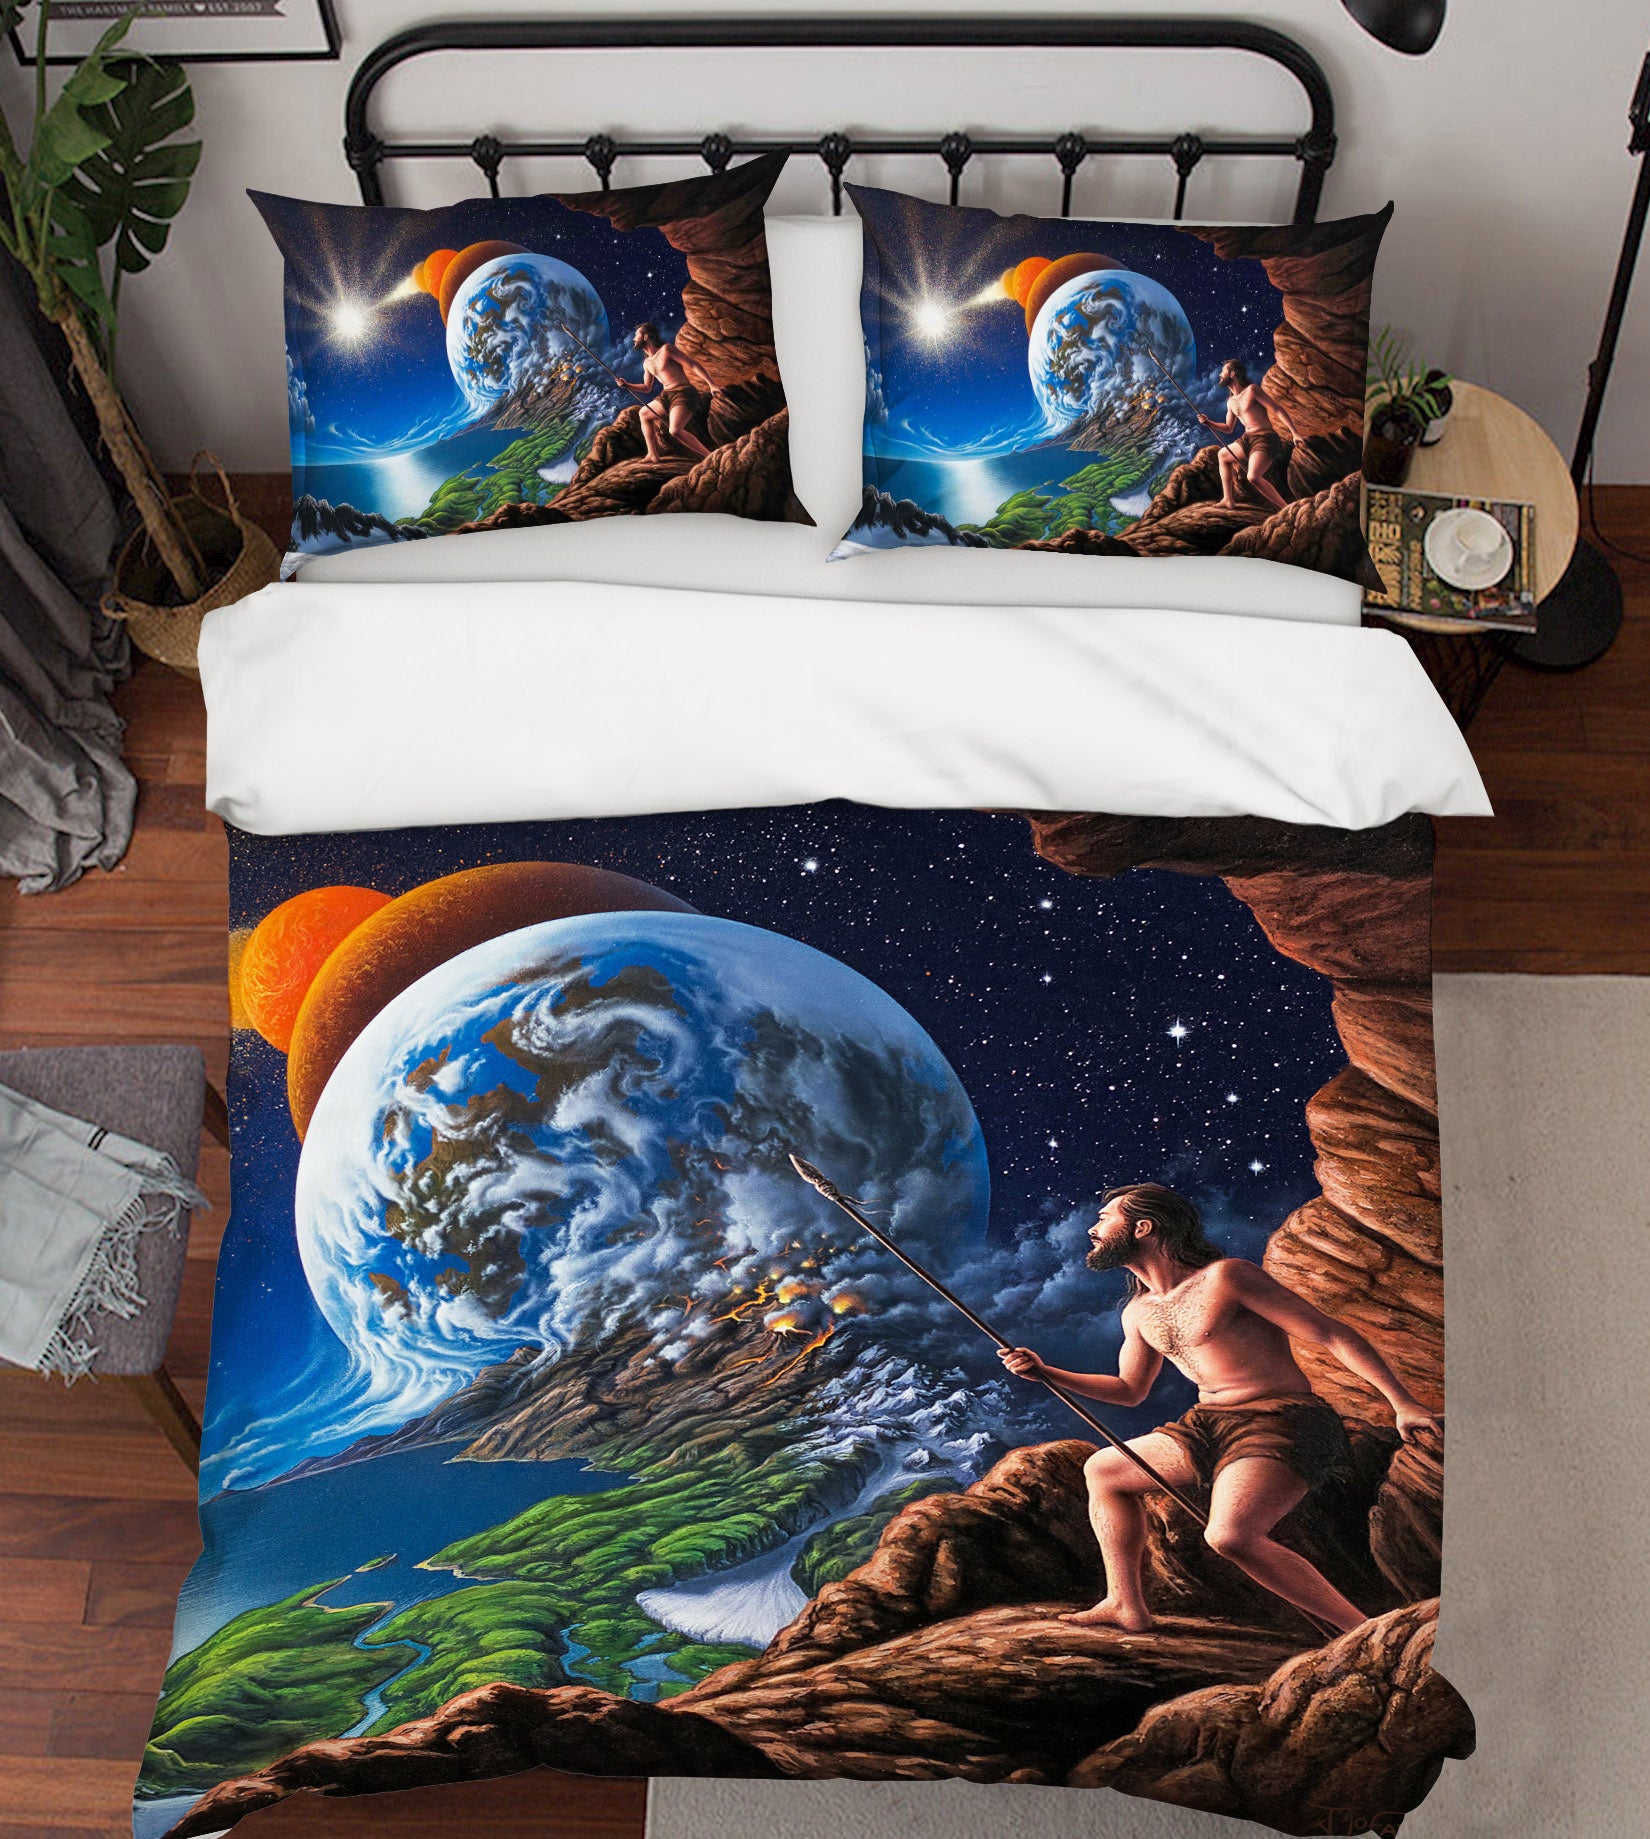 3D Earth Planet 86024 Jerry LoFaro bedding Bed Pillowcases Quilt